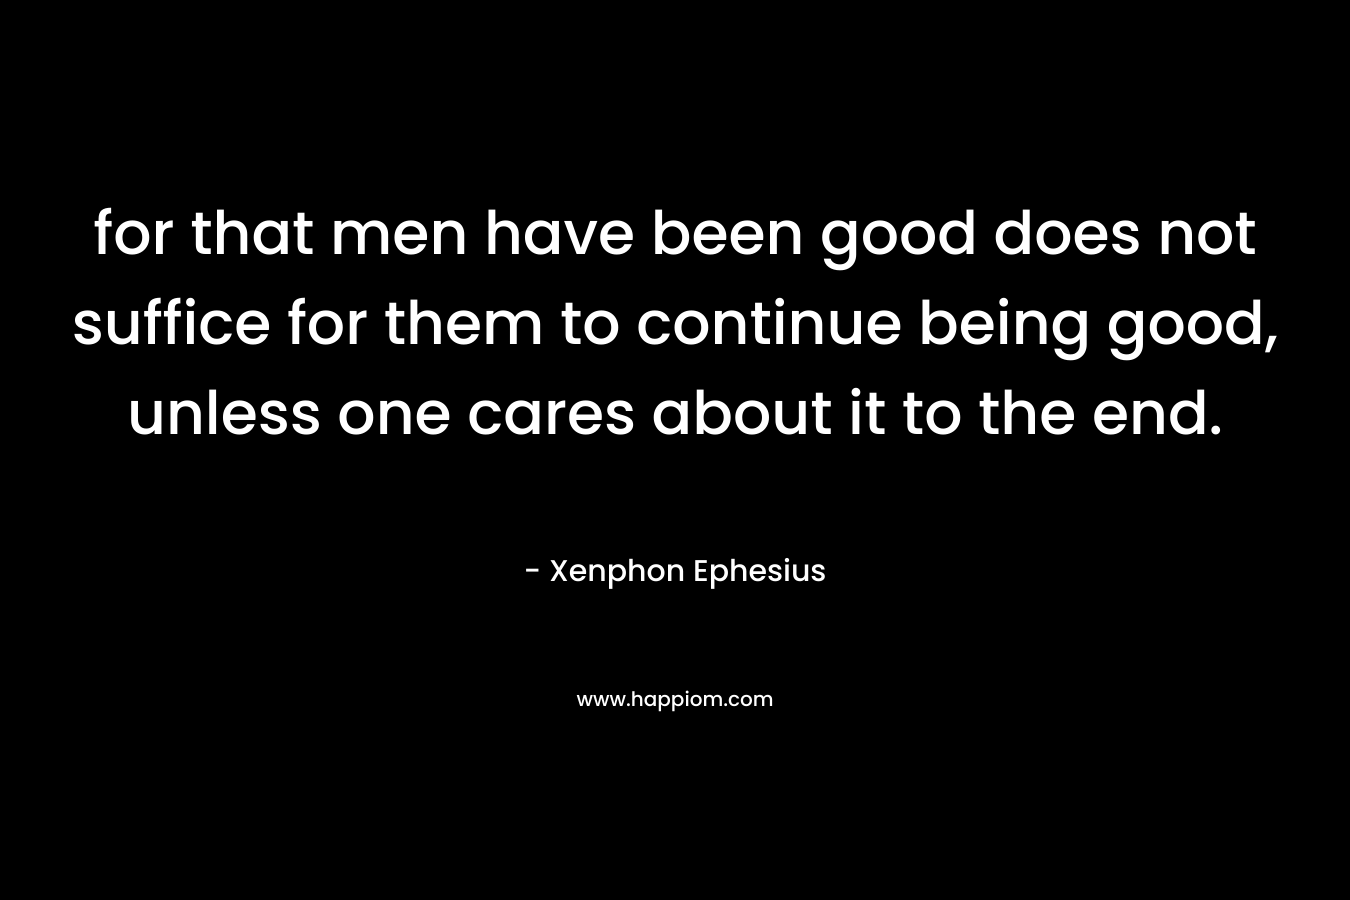 for that men have been good does not suffice for them to continue being good, unless one cares about it to the end. – Xenphon Ephesius